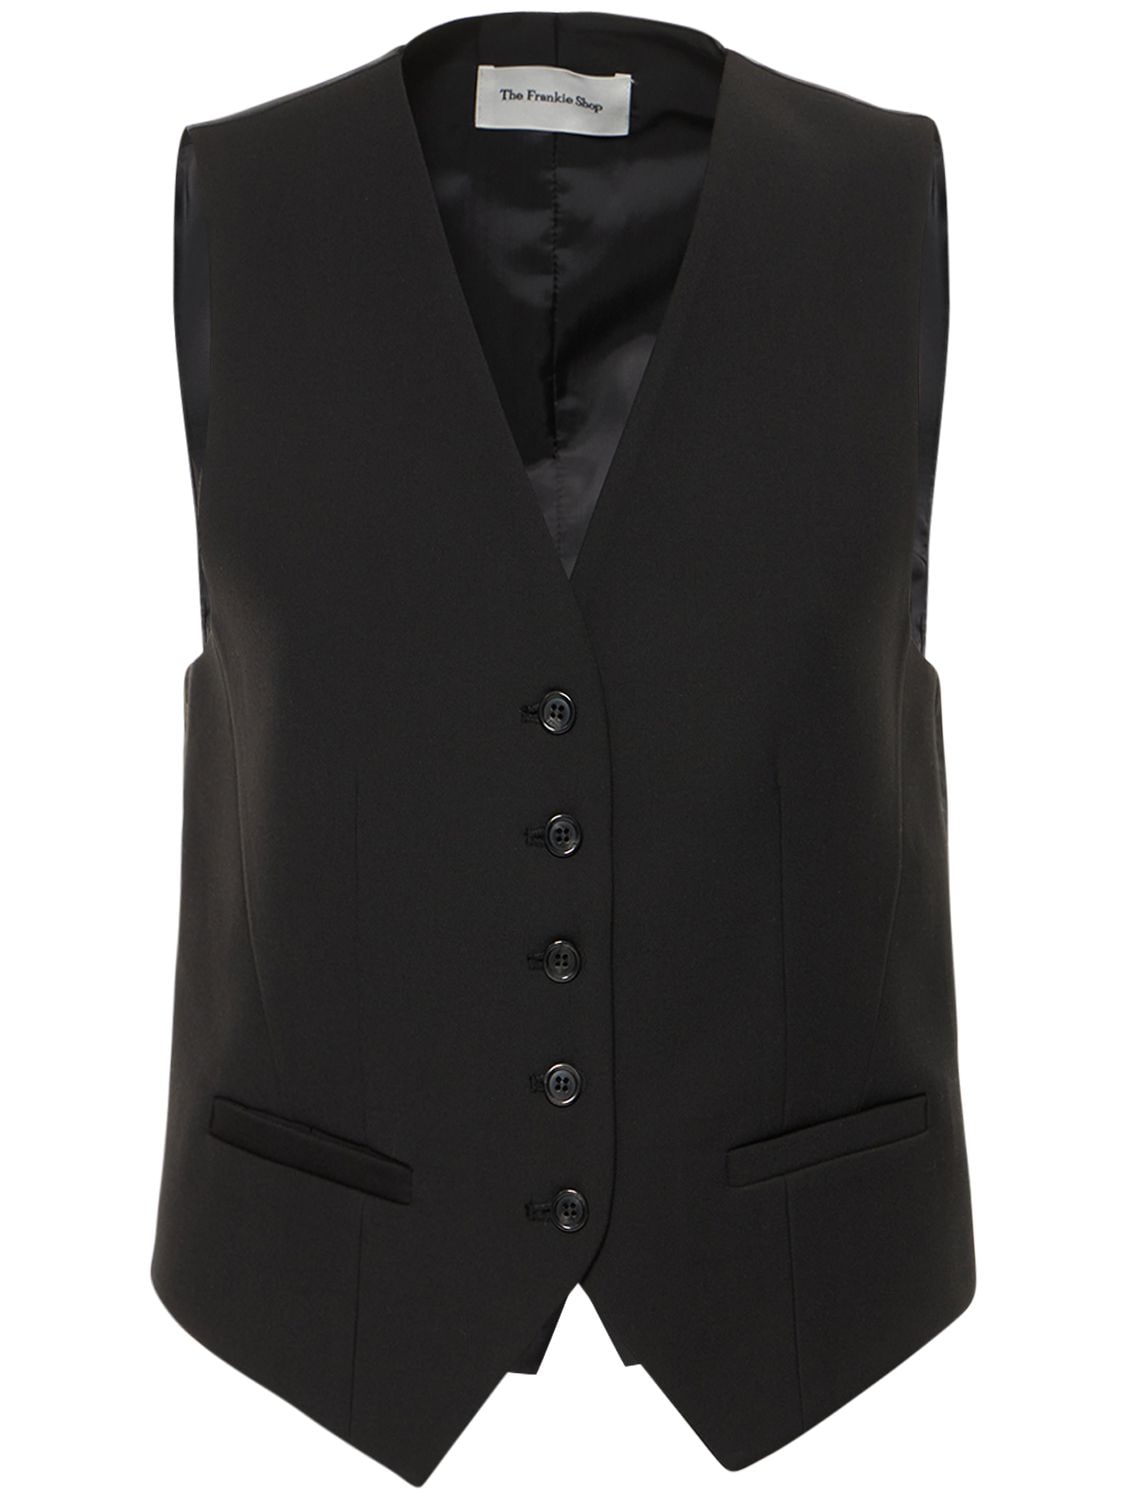 THE FRANKIE SHOP GELSO LYOCELL BLEND WAISTCOAT